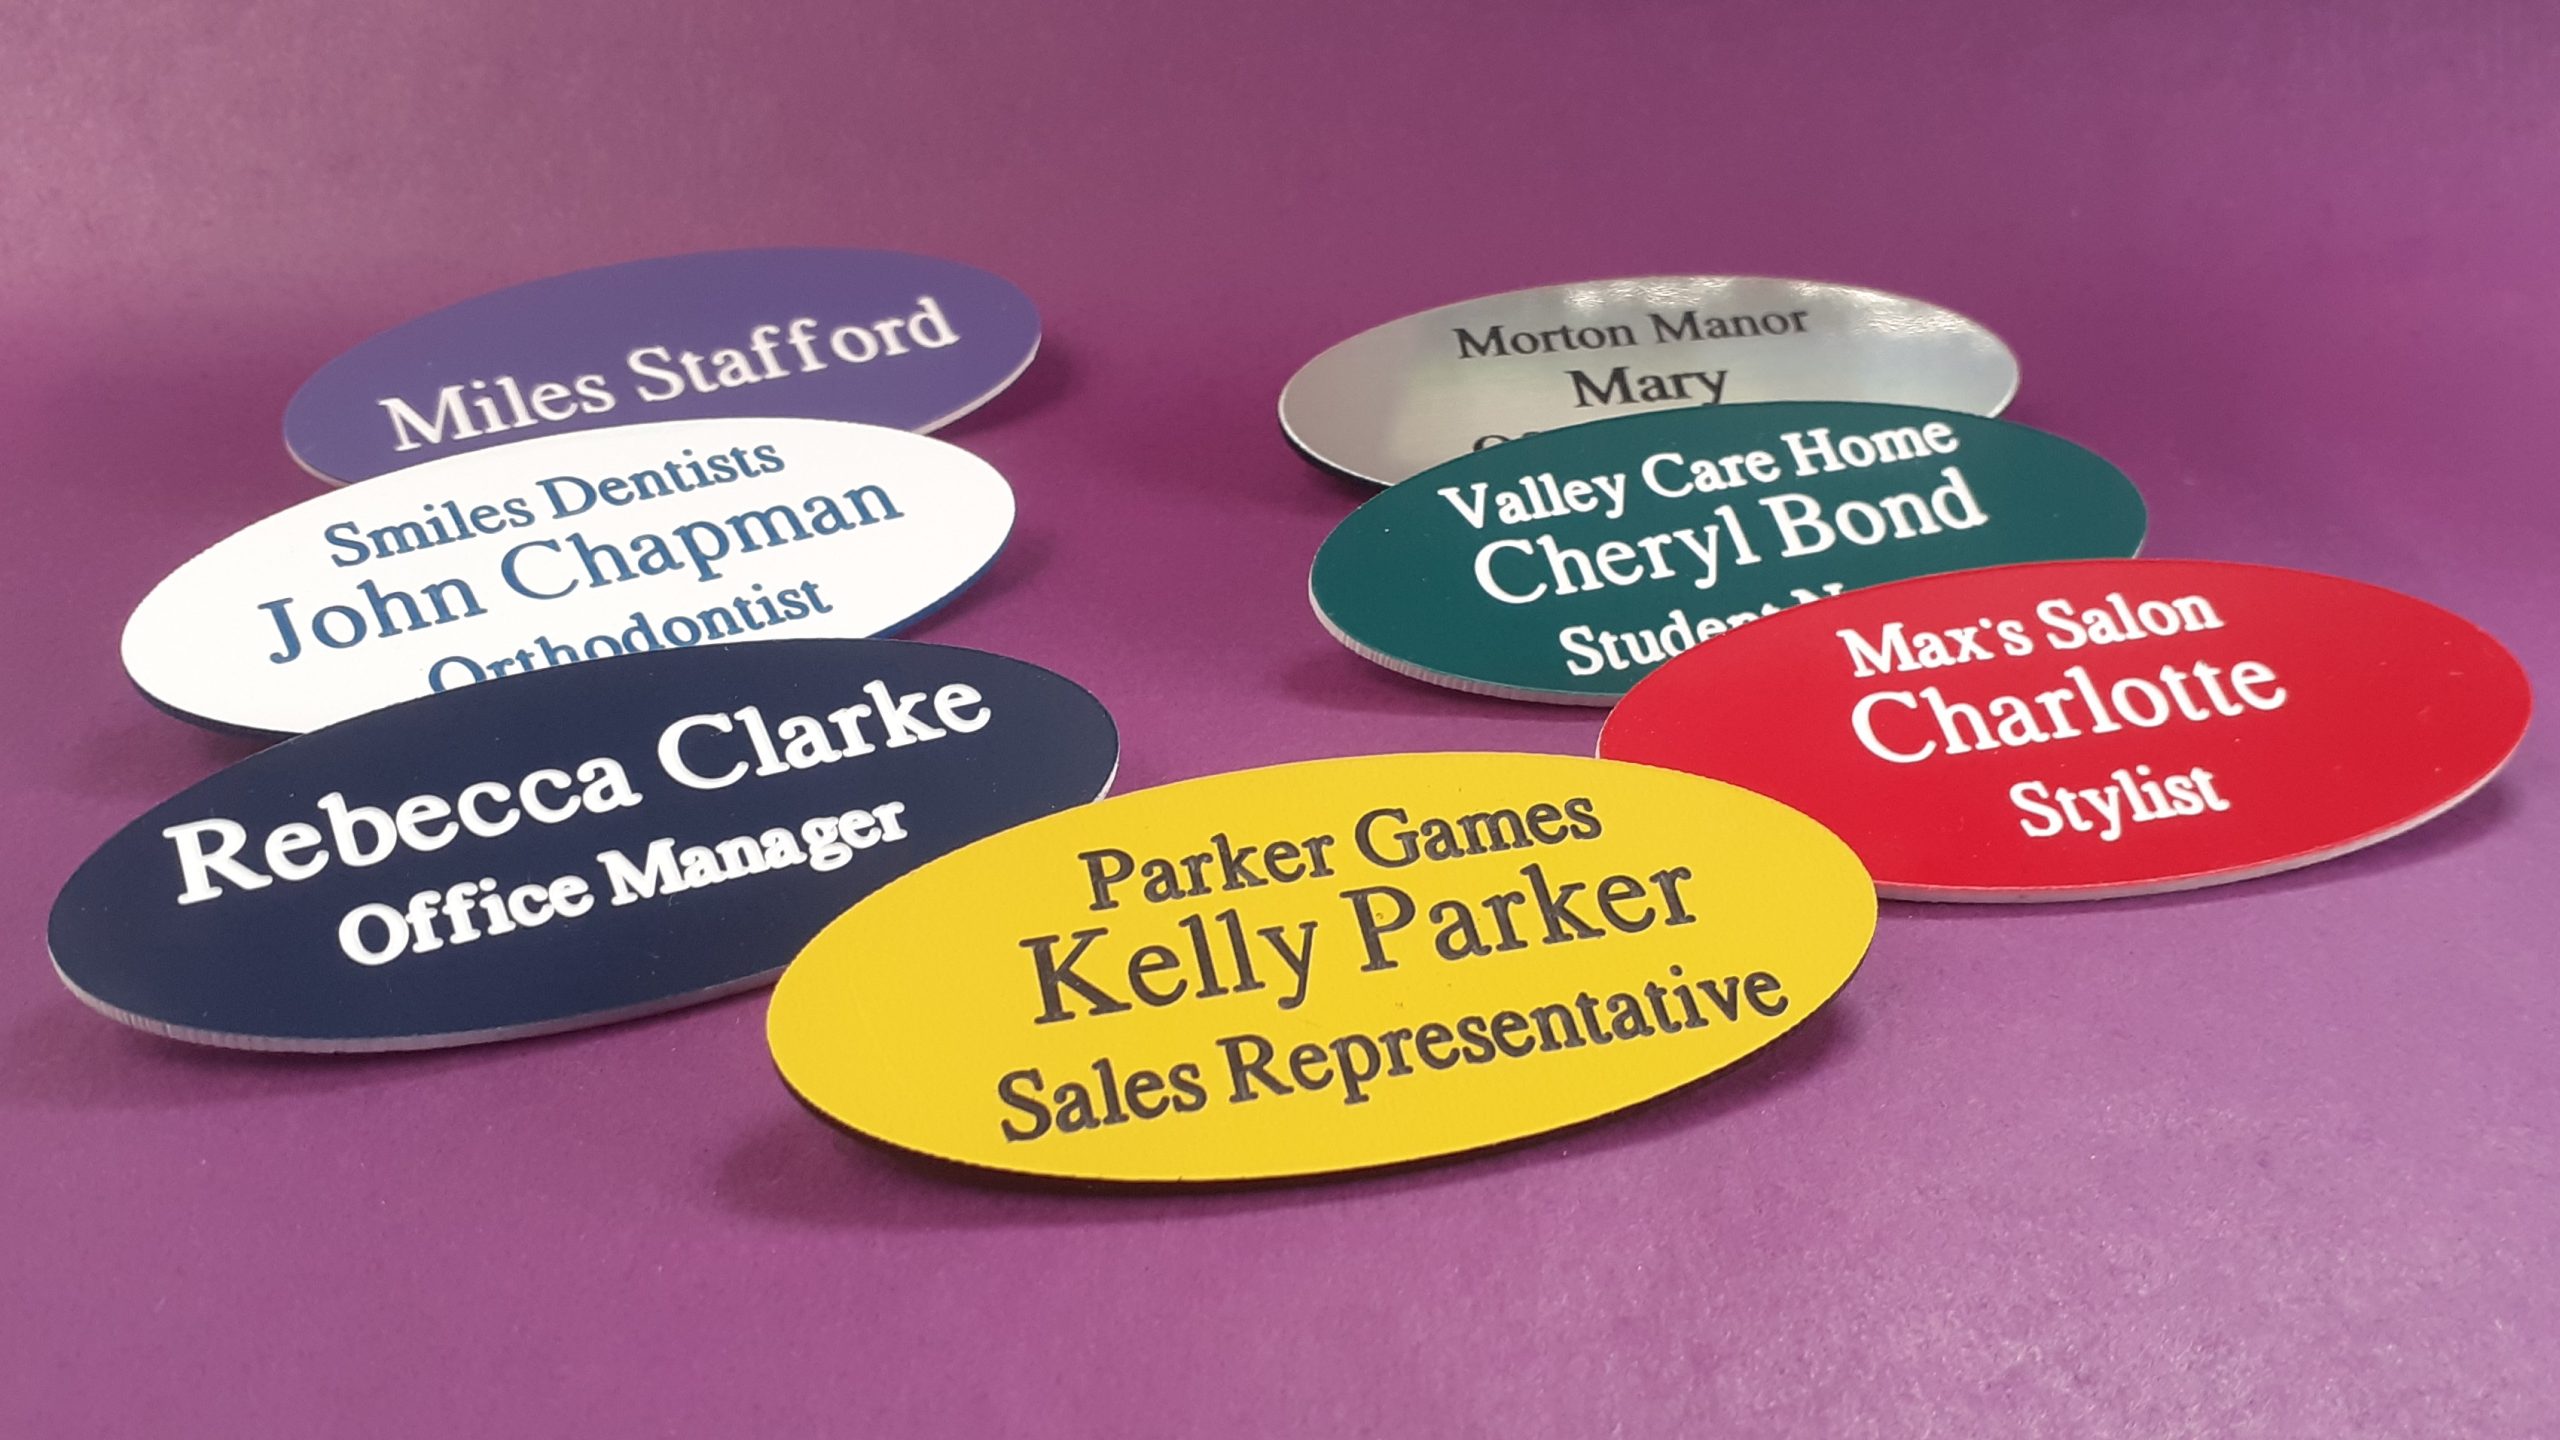 Customized oval-shaped name badge made from Engraved Coloured Acrylics, a unique and stylish addition to your attire